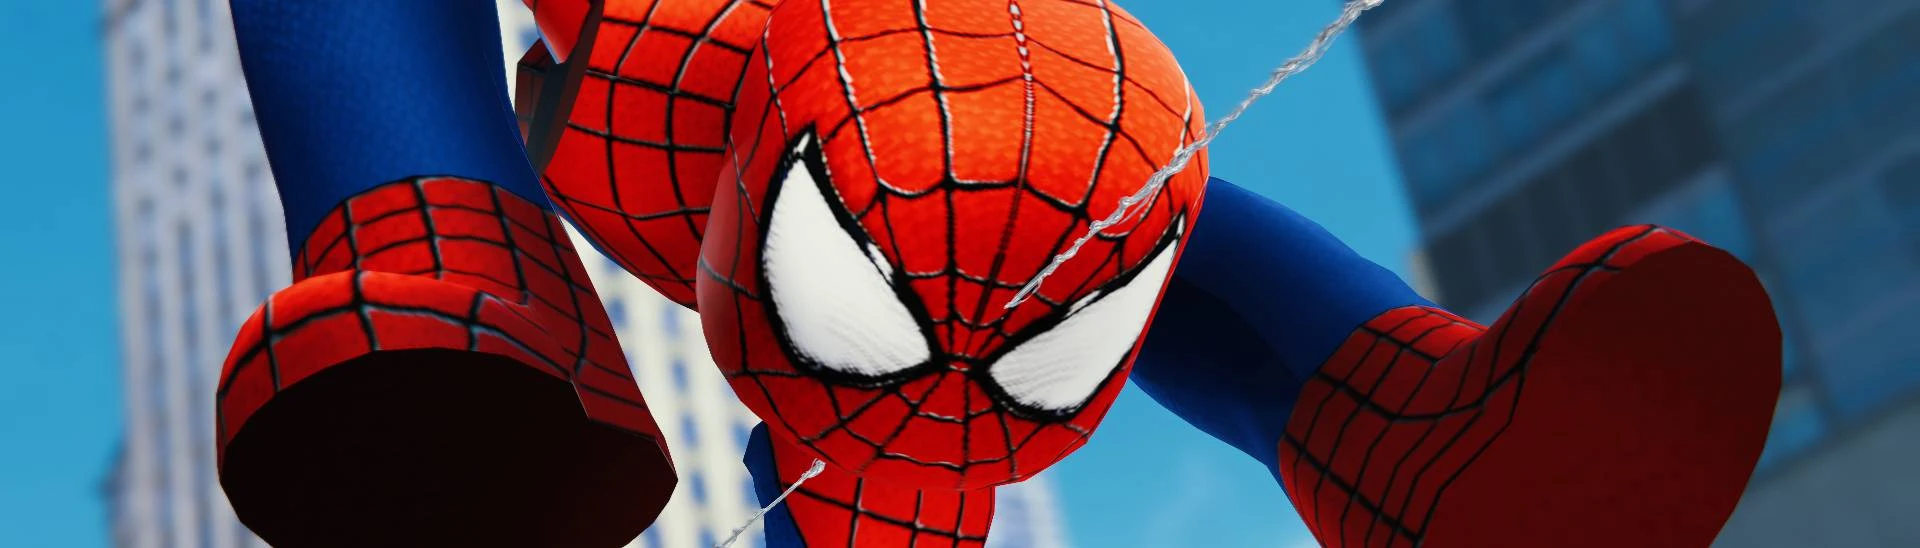 Mod Request - Roblox Spider-Man Suit Mod at Marvel's Spider-Man Remastered  Nexus - Mods and community